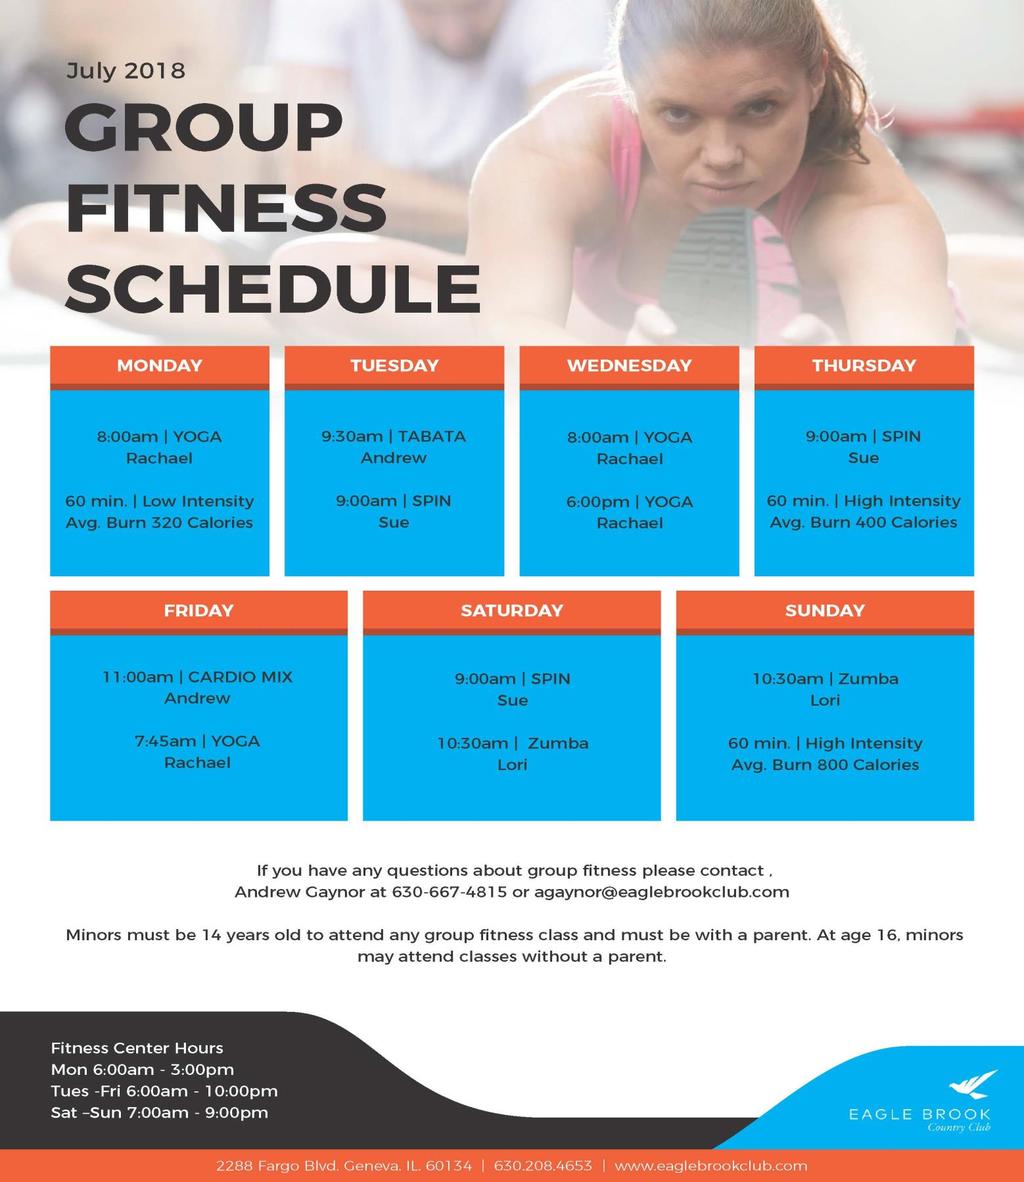 August Fitness Schedule Eagle Brook Fitness Center Hours Monday: